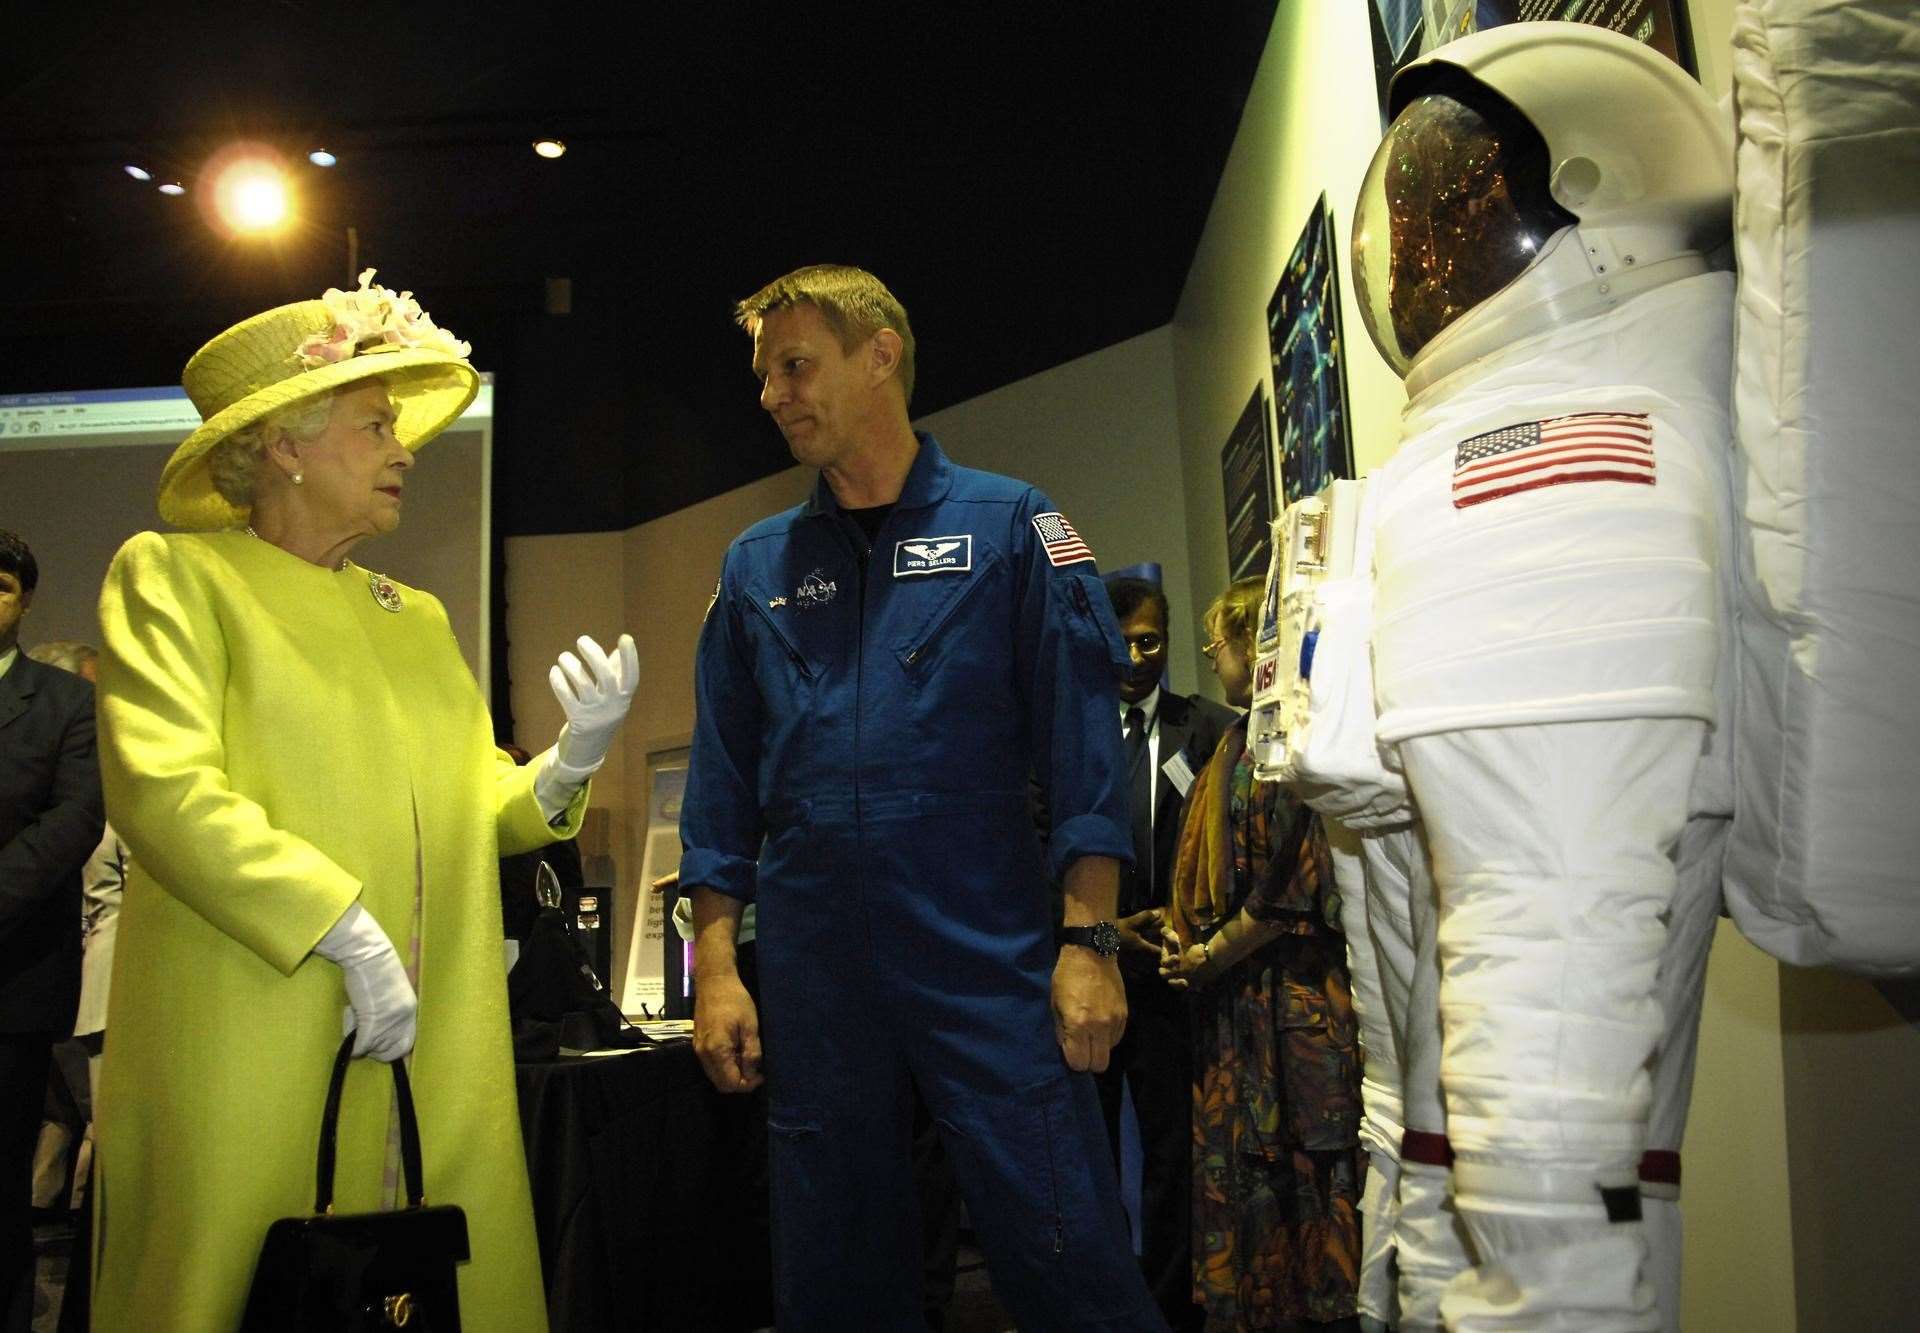 The Queen meets Piers Sellers at the Goddard Space Flight Centre in 2007. Picture: Nasa